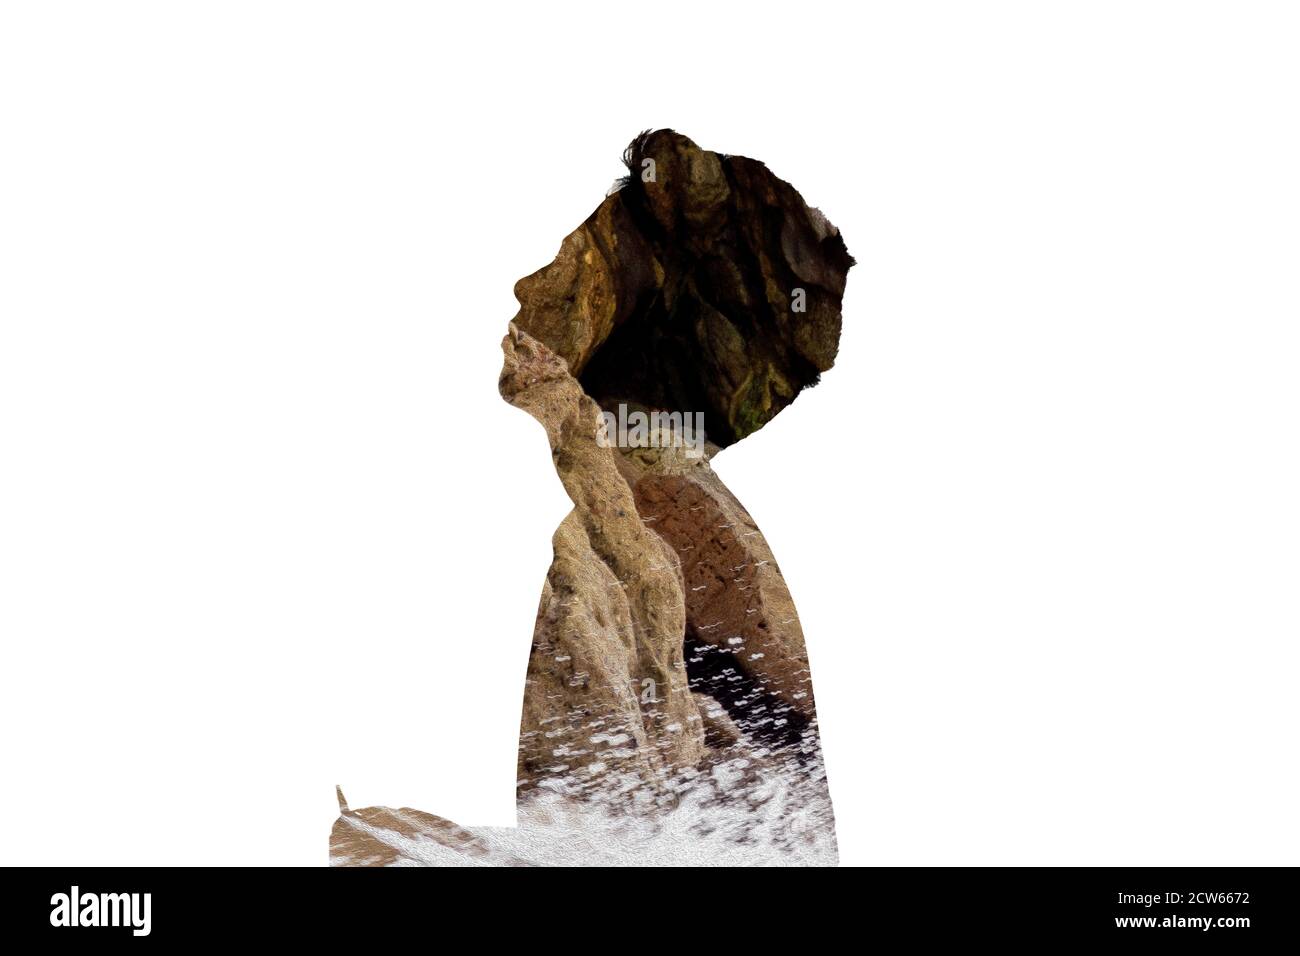 Multiple exposure digital composite with a silhouette of a person in profile and colorful rocks and cliff. Stock Photo